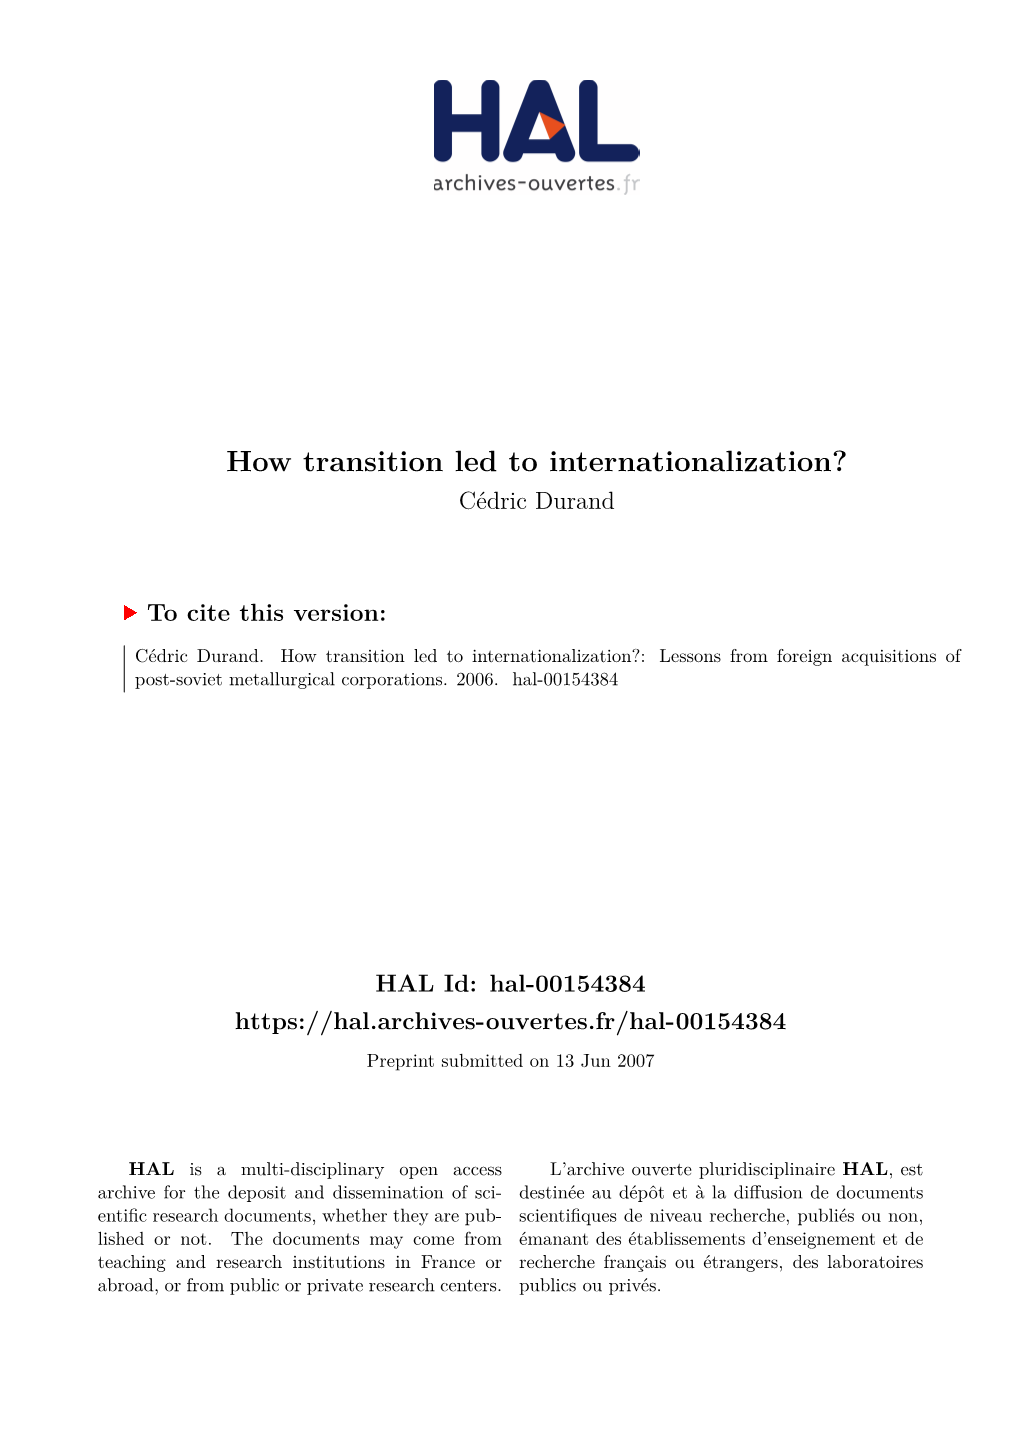 How Transition Led to Internationalization? Cédric Durand